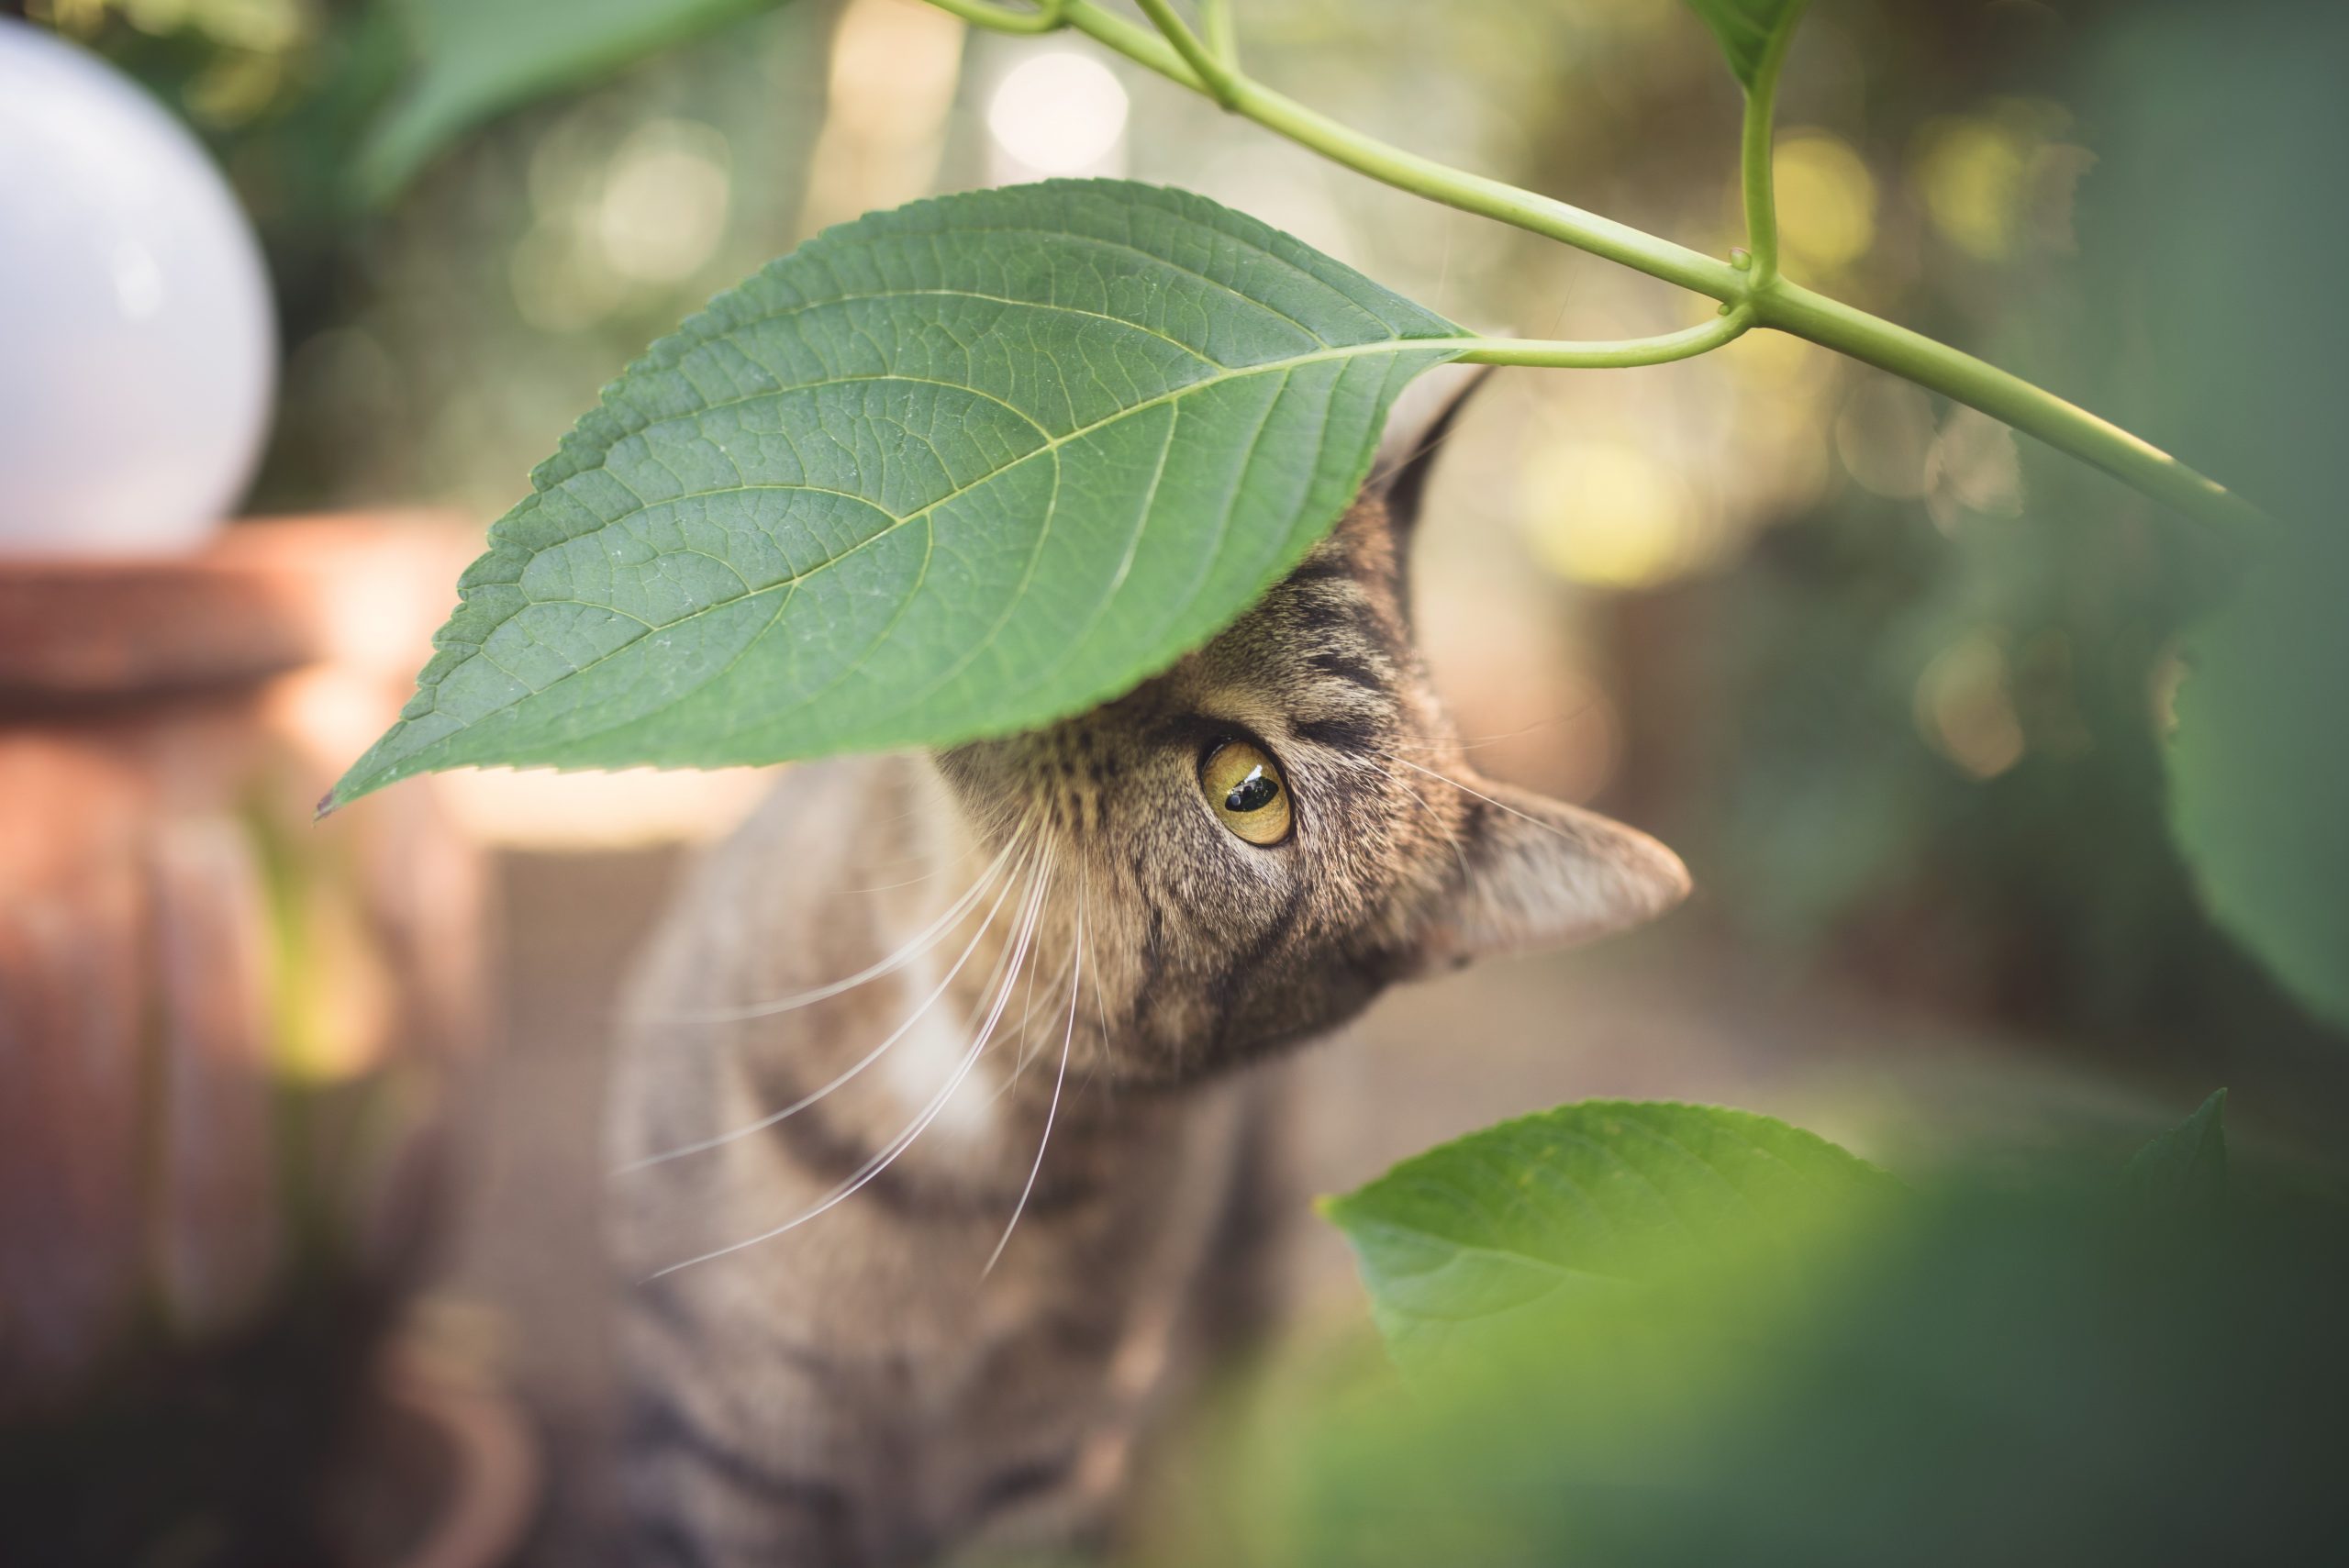 22 Houseplants Poisonous to Cats | Plants That Are Toxic to Cats